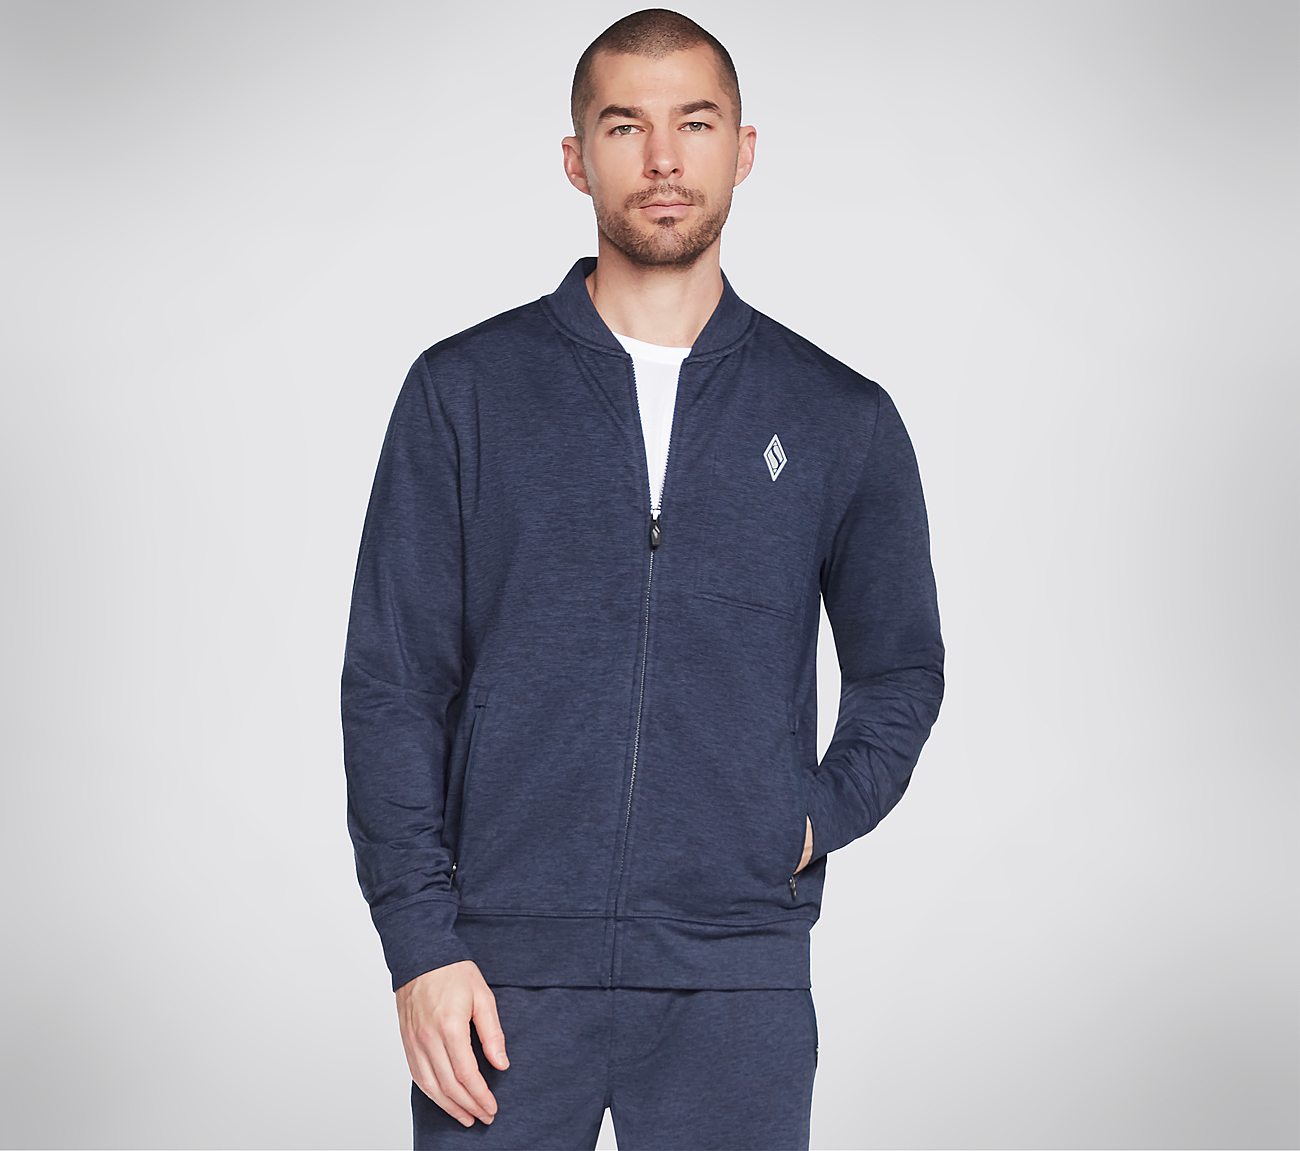 SKECH-KNITS ULTRA GO HOODLESS, NNNAVY Apparel Lateral View